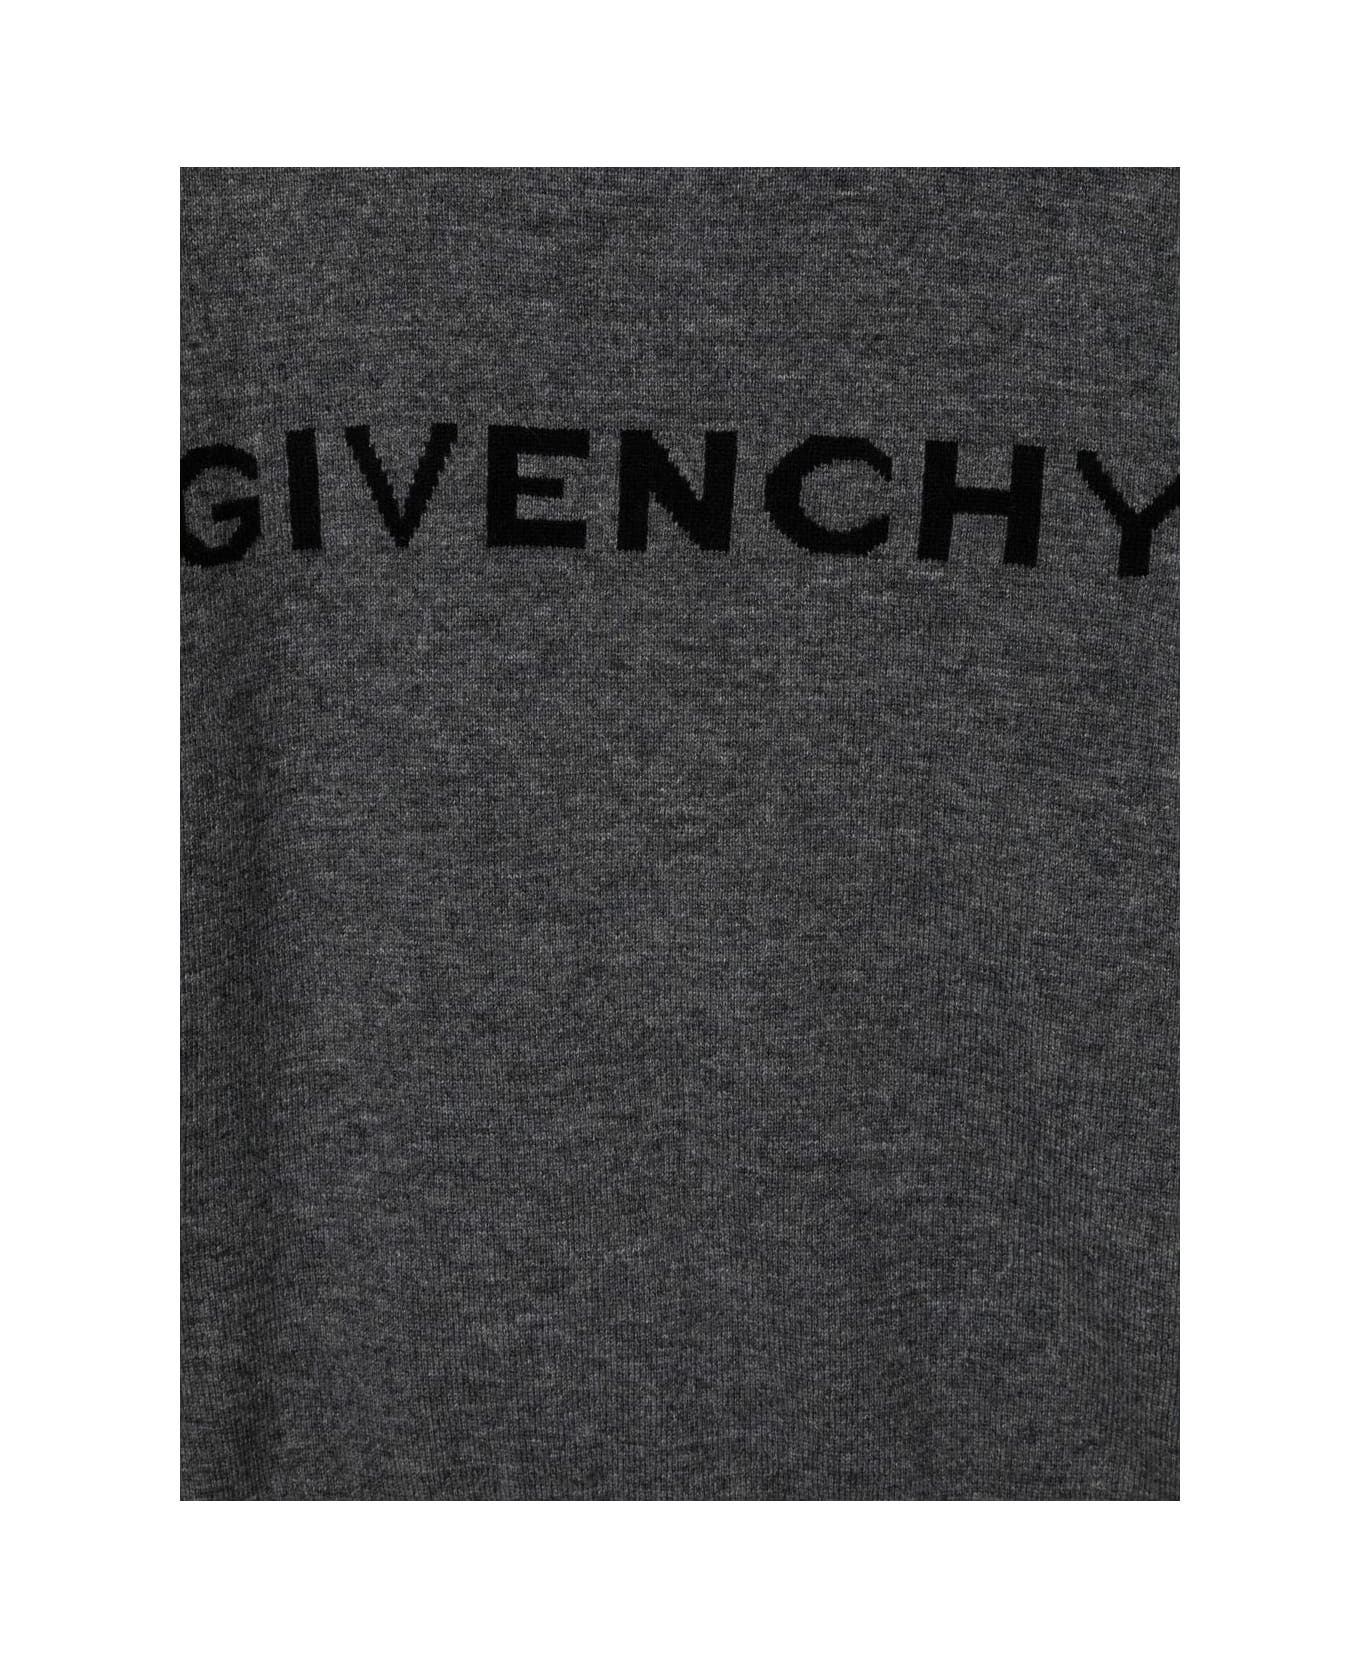 Givenchy Grey And Black Givenchy 4g Sweater - Anthracite chine